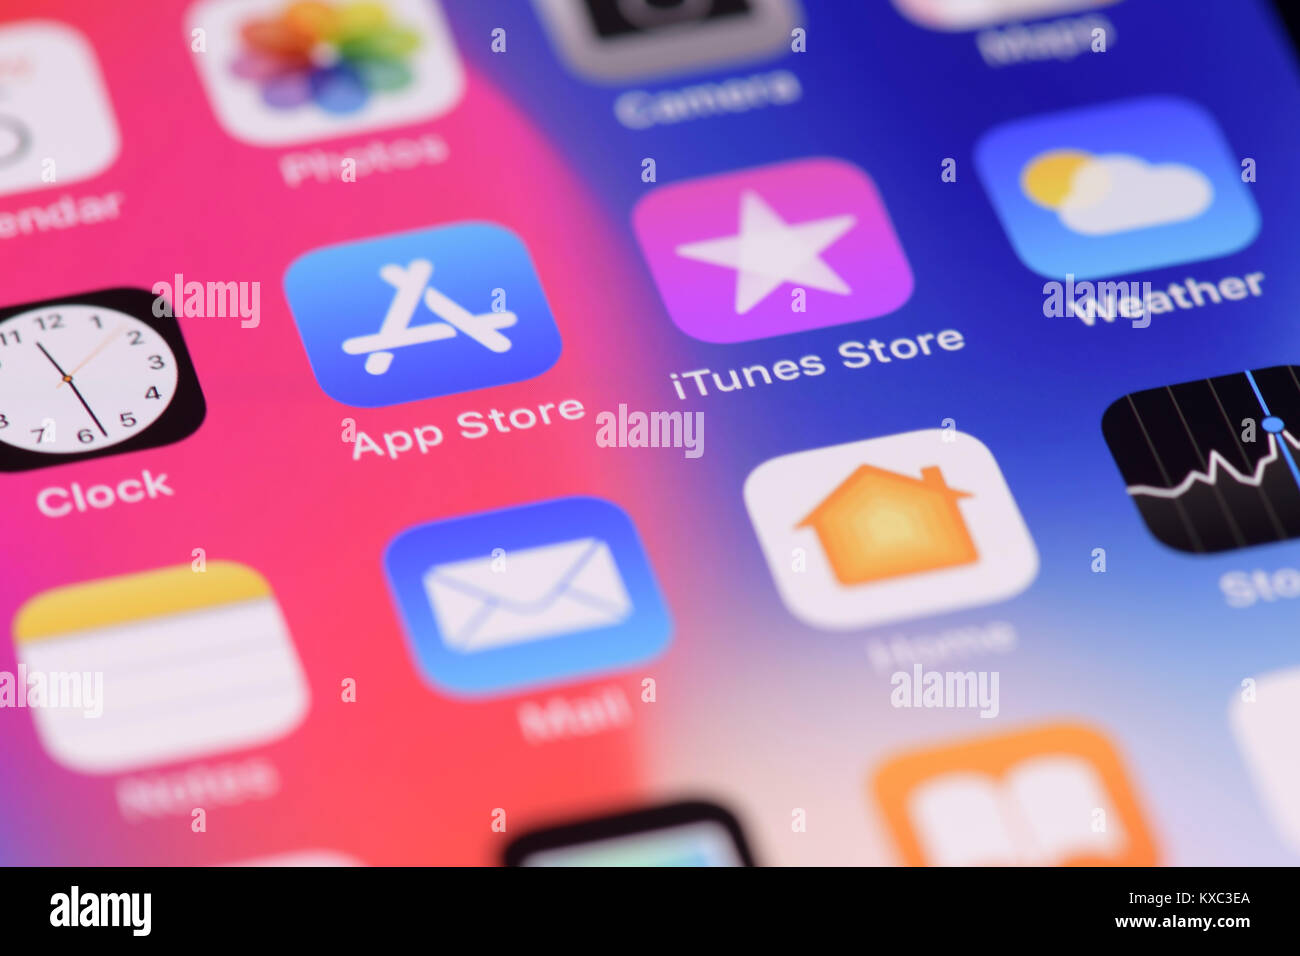 Closeup of iPhone screen with colorful app icons on desktop Stock Photo